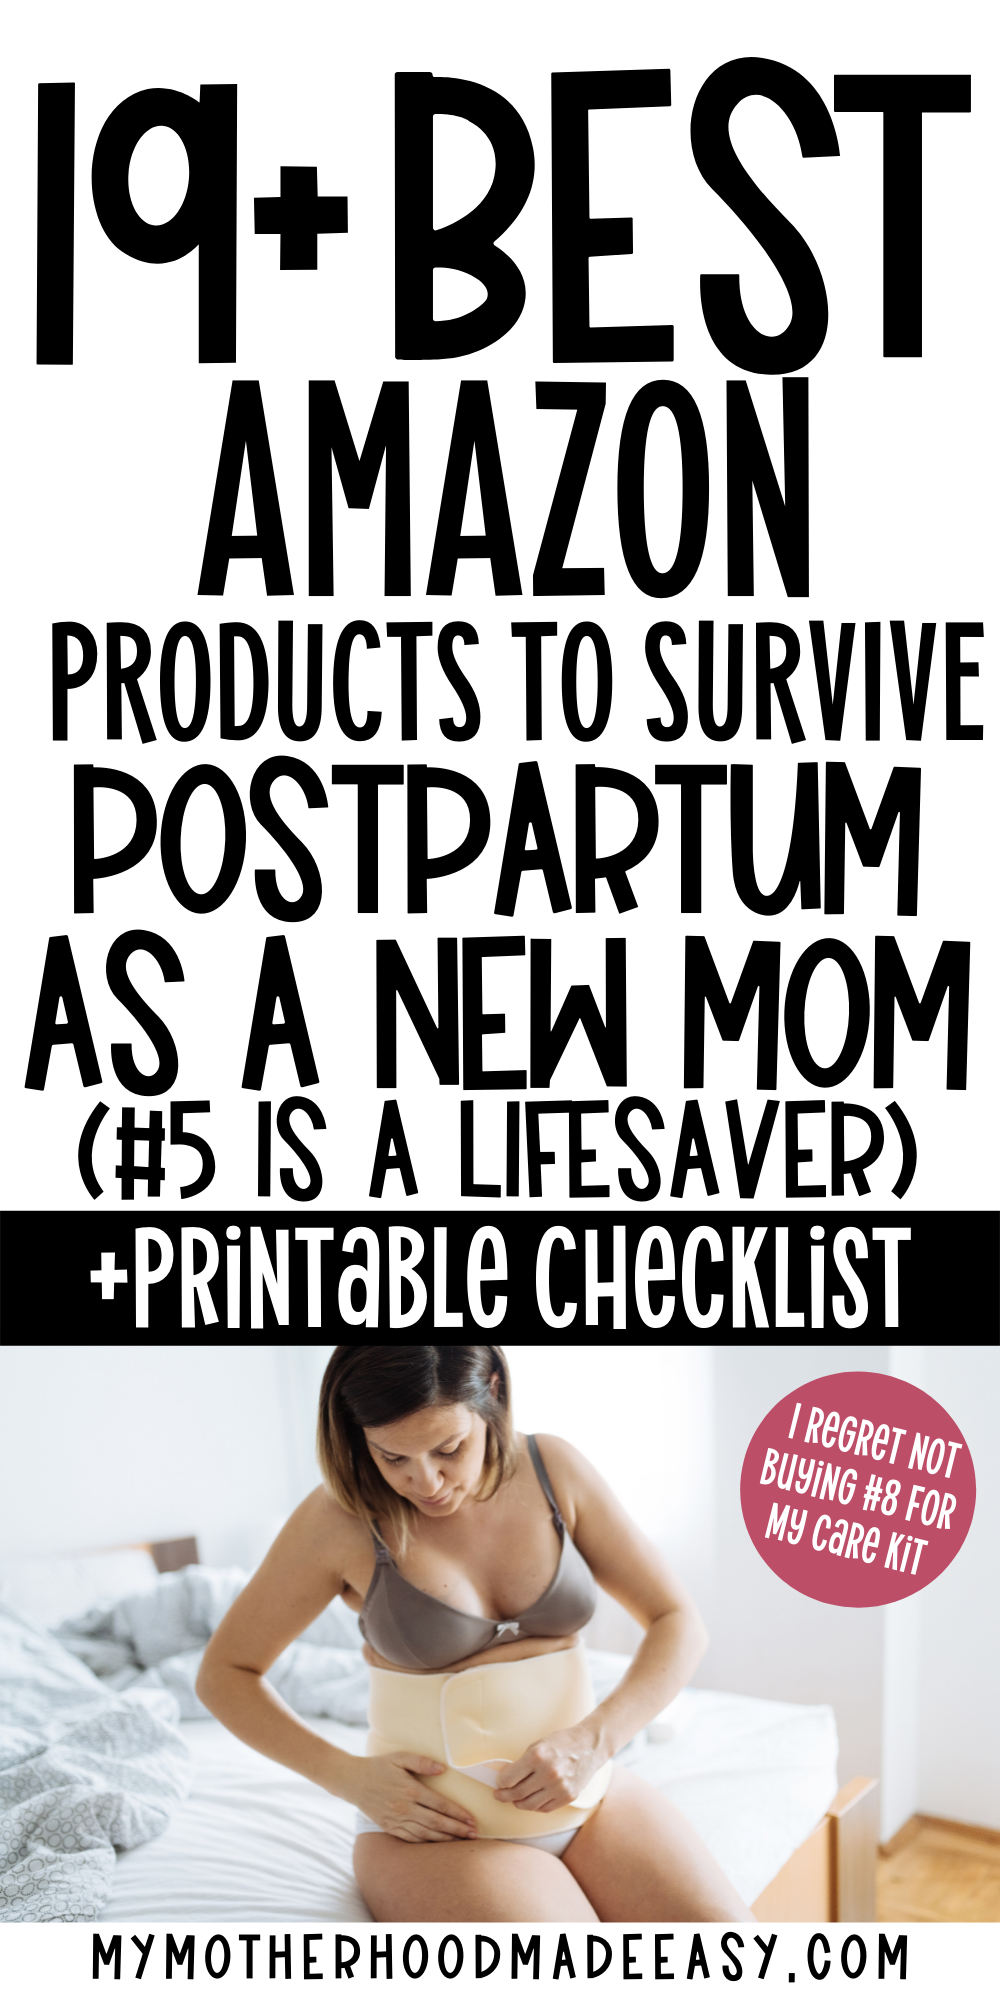 Looking for the best postpartum essentials? Click this pin for more ! postpartum products postpartum products for mom postpartum products recovery best postpartum products best postpartum care products postpartum care postpartum care checklist postpartum list products top postpartum products favorite postpartum products Postpartum Must Haves Postpartum essentials for mom